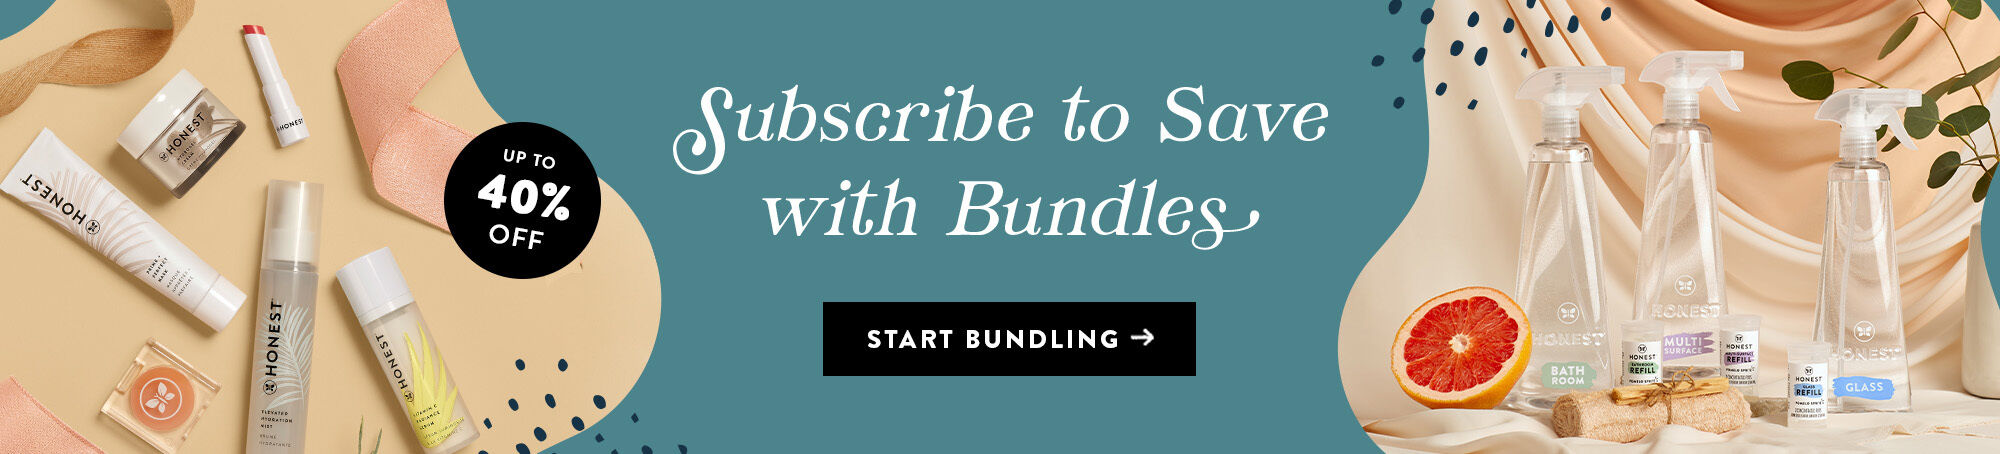 Subscribe to save with bundles